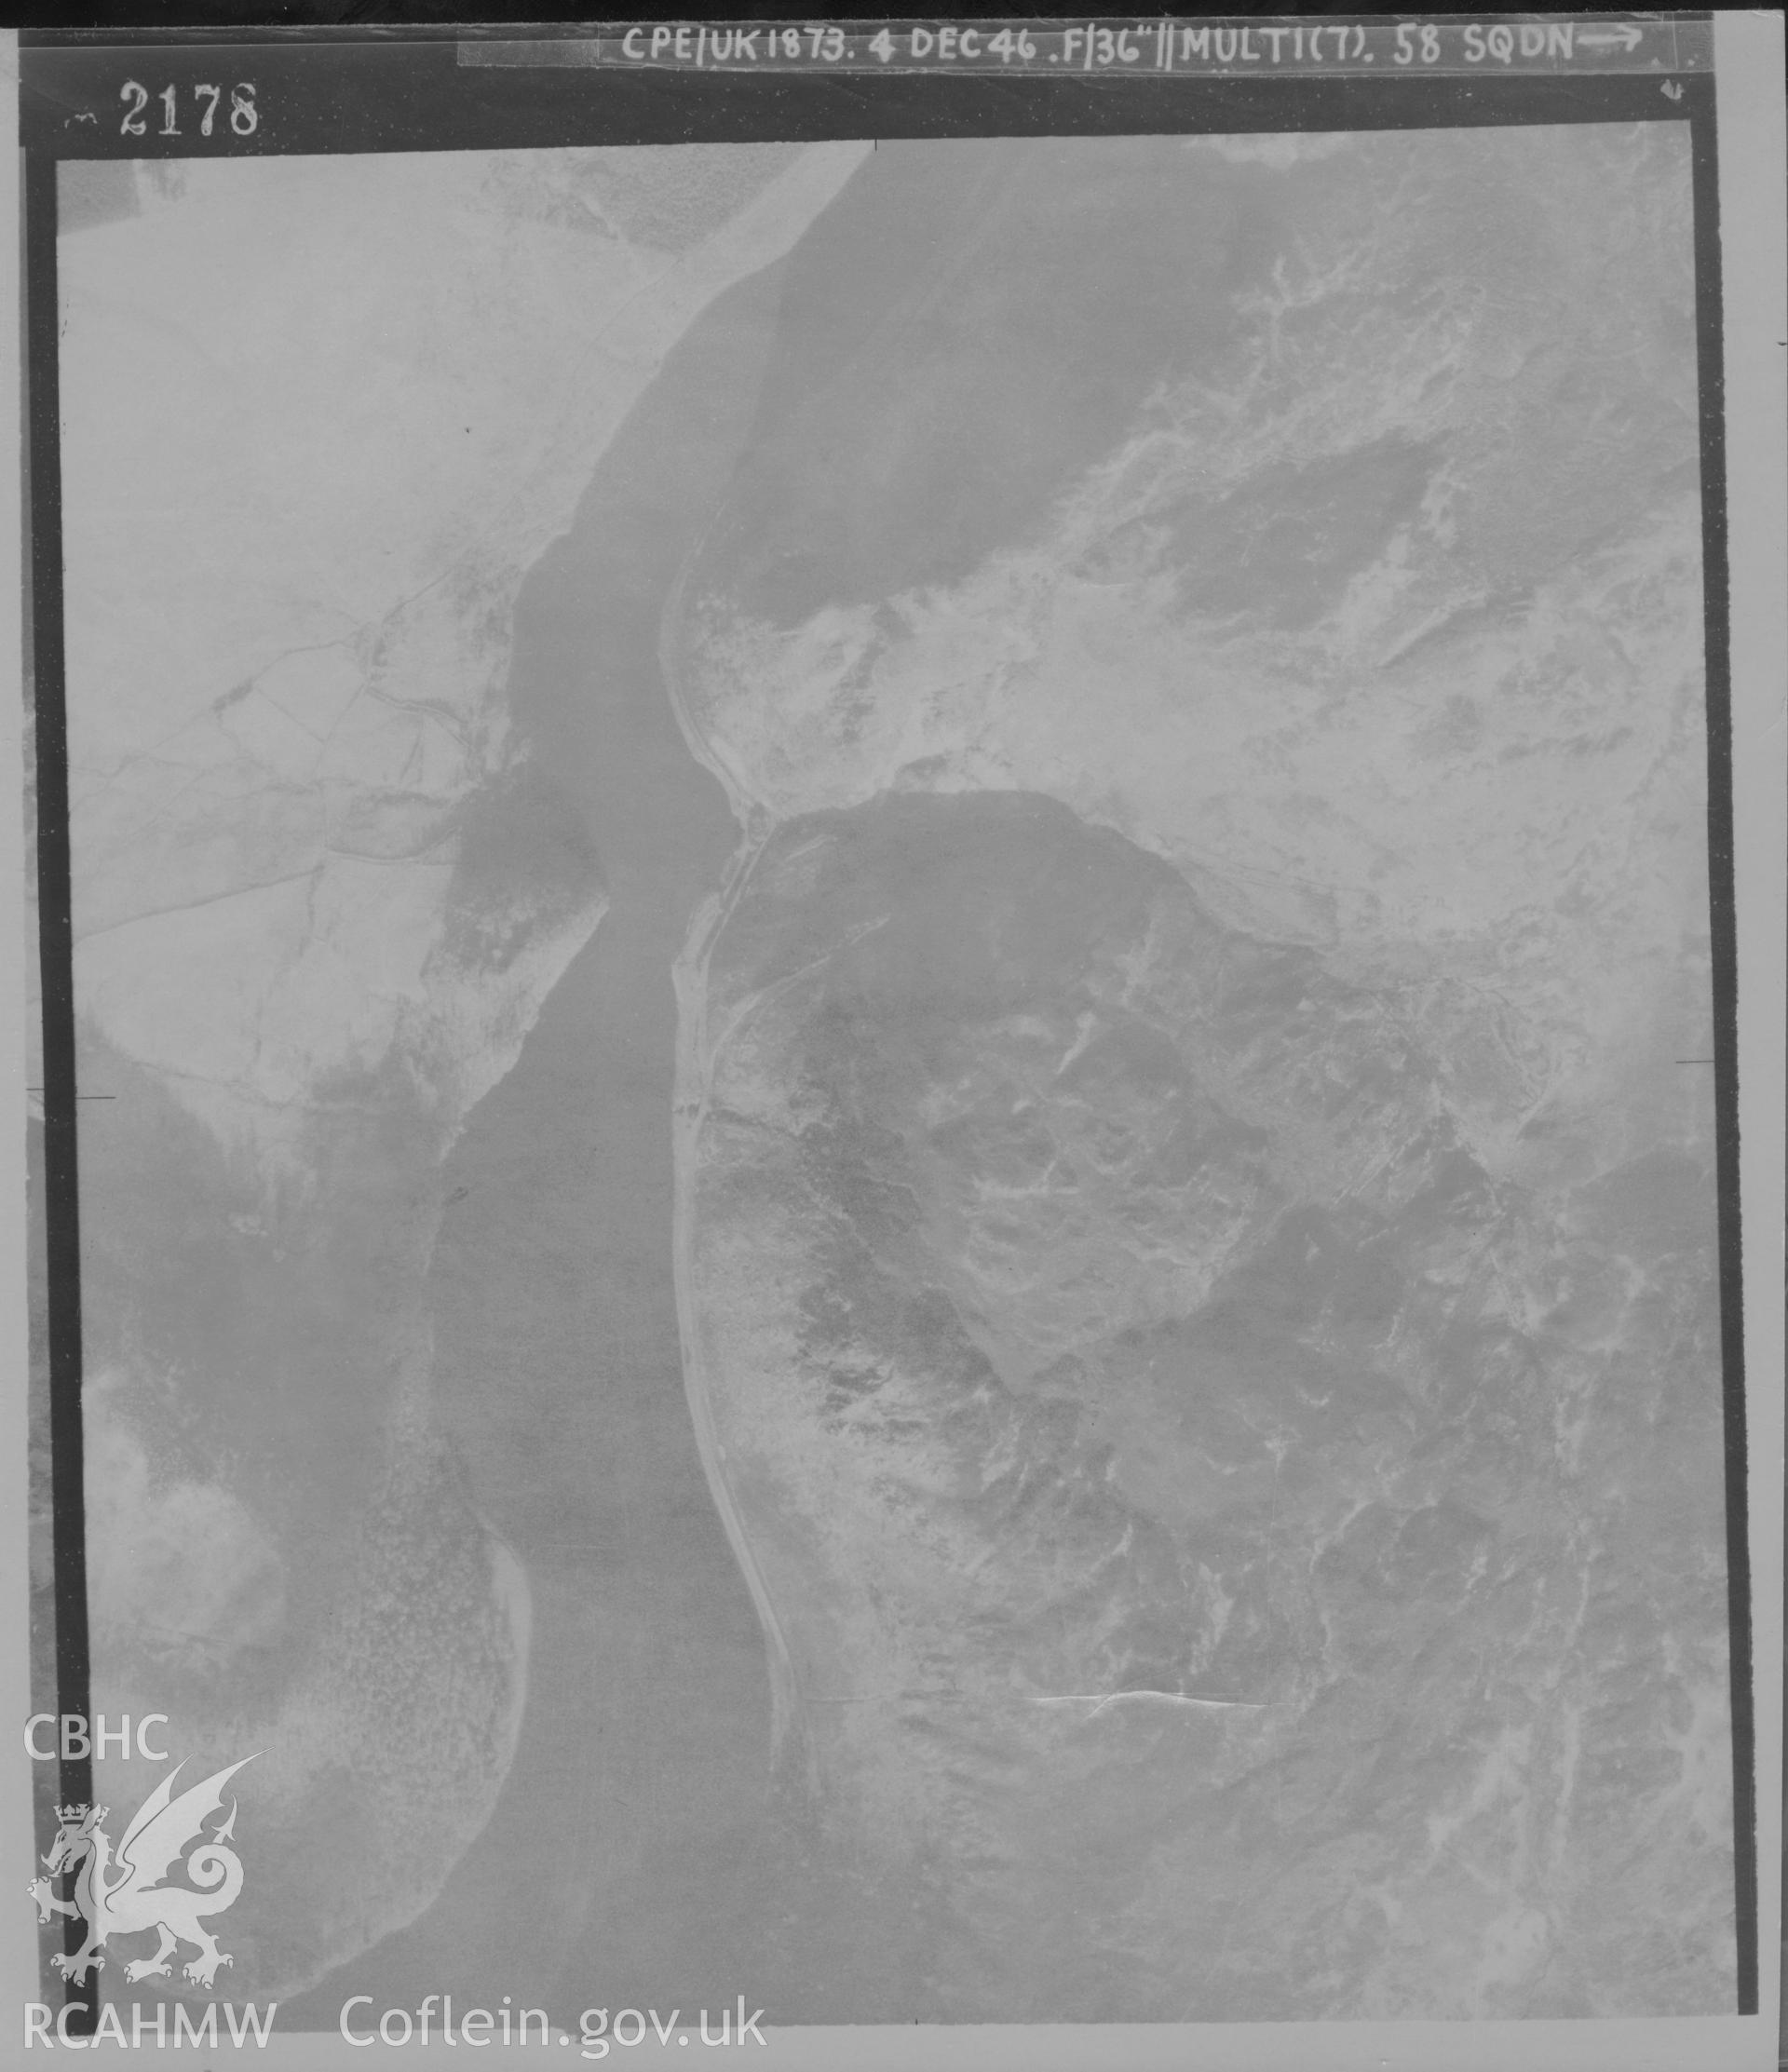 Aerial photograph of the Elan Valley, dated 1946. Included in material relating to Archaeological Desk Based Assessment of Afon Claerwen, Elan Valley, Rhayader, Powys. Assessment conducted by Archaeology Wales in 2018. Report no. 1681. Project no. 2573.